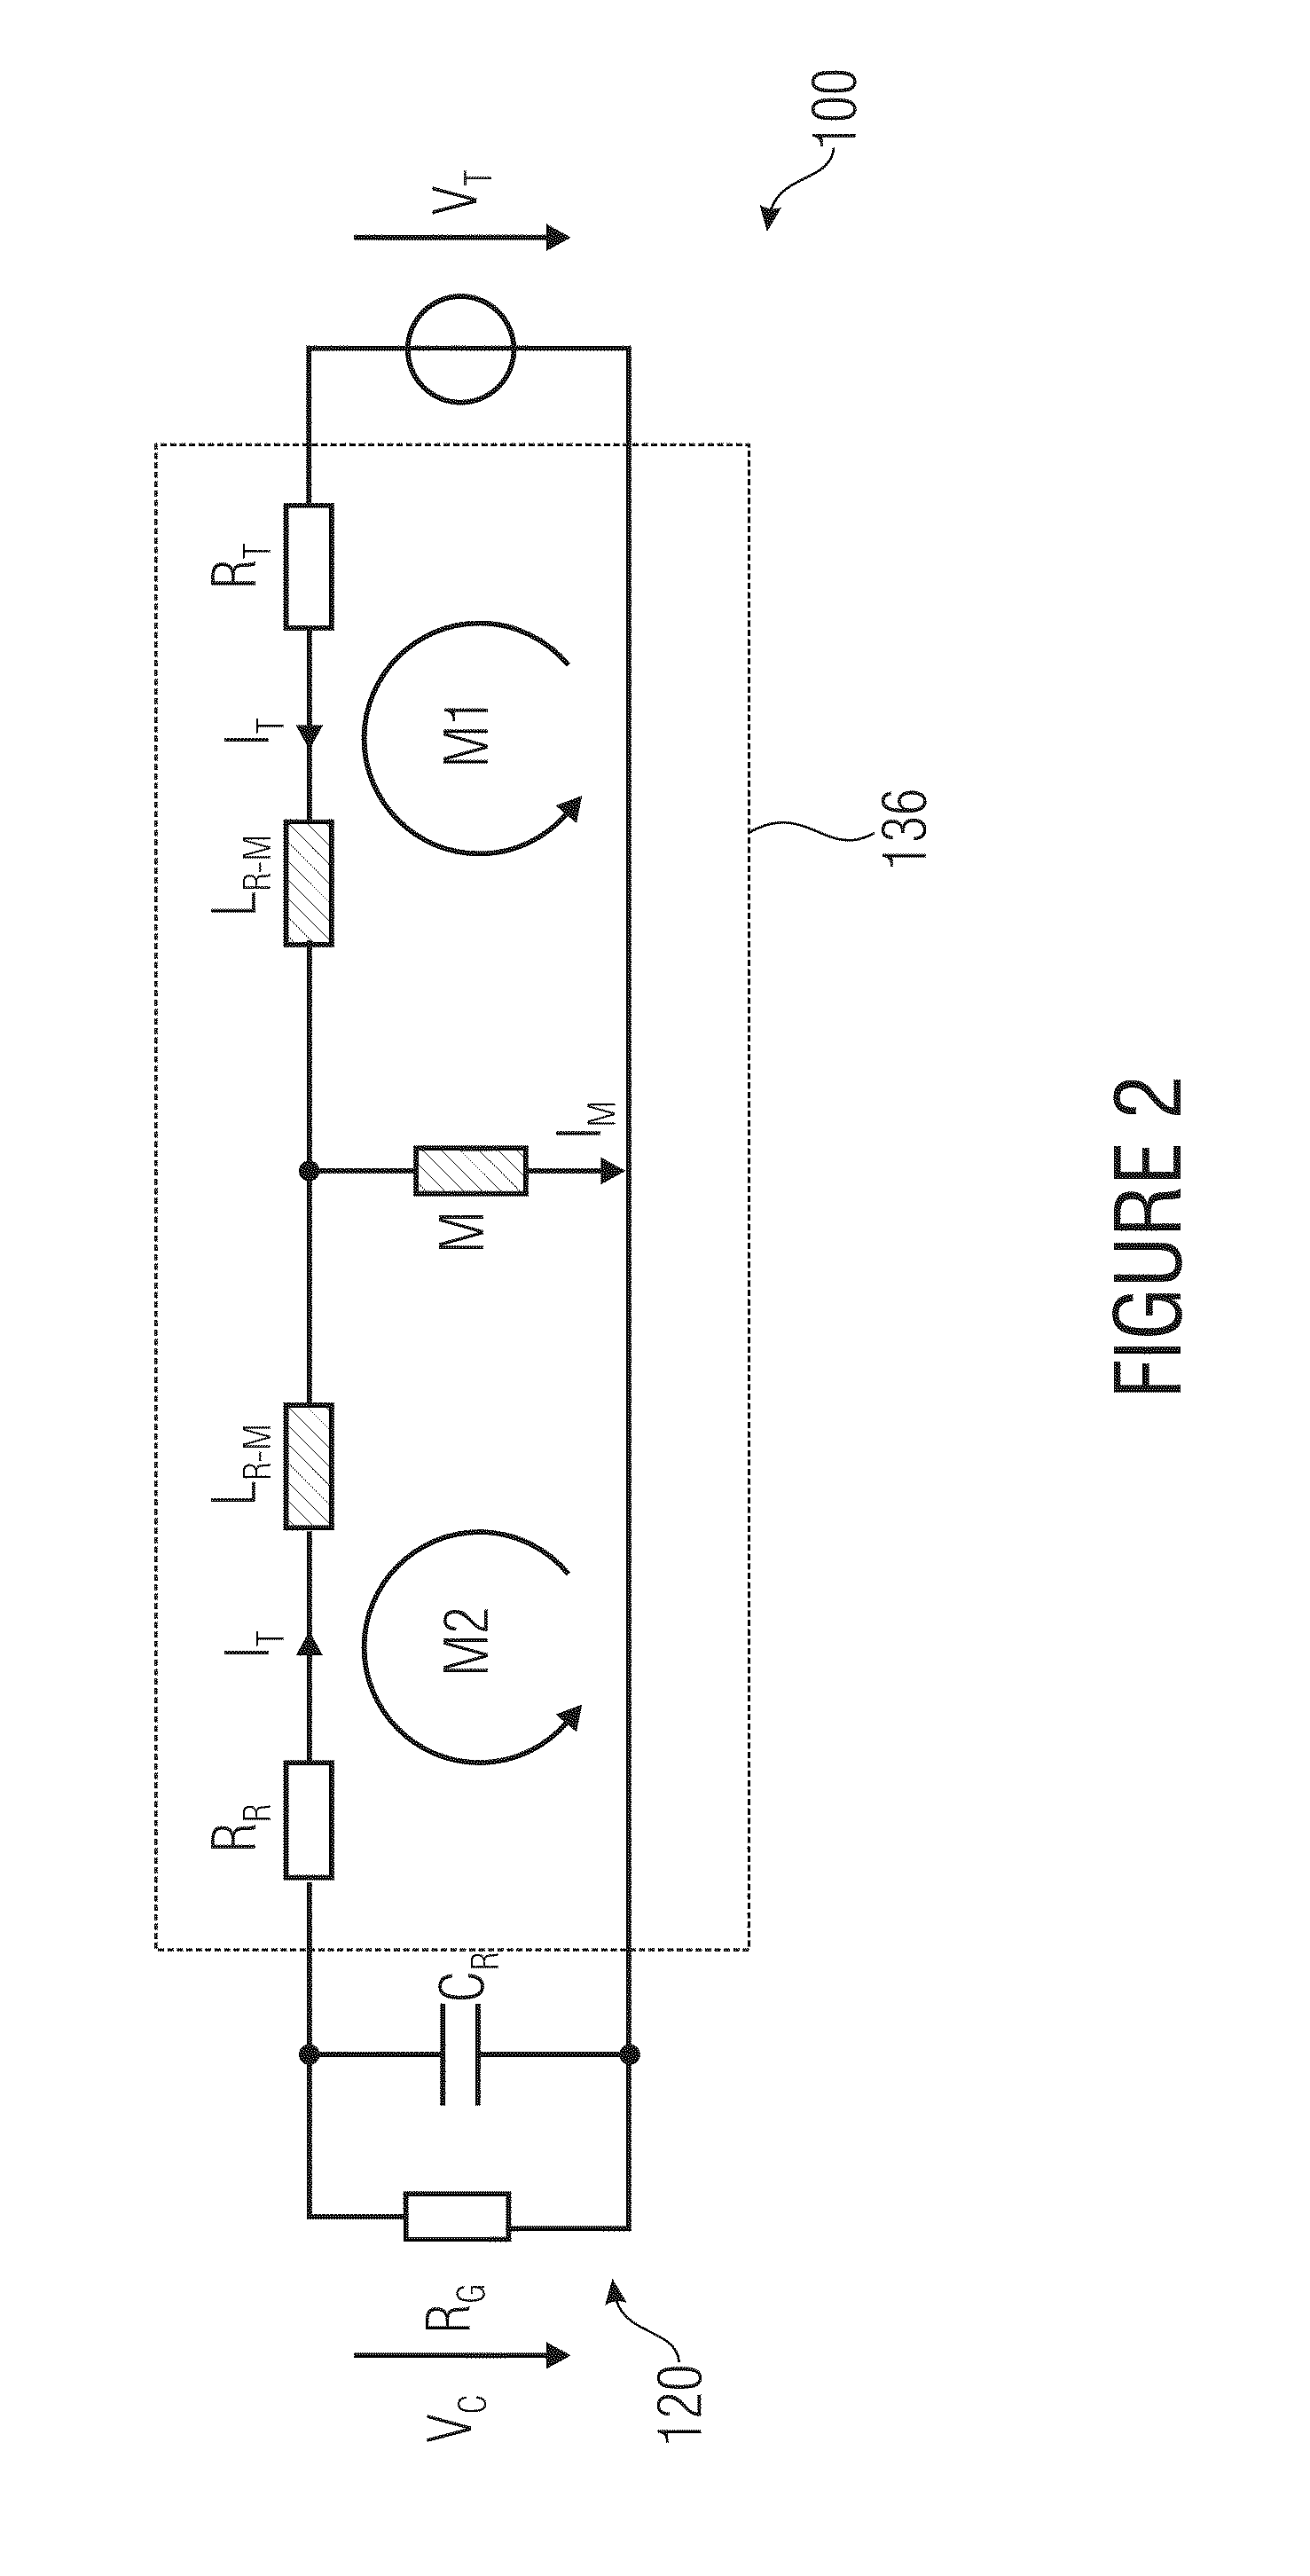 Passive transponder for an RFID system, and method of transmitting data from/to a data source of such a passive transponder